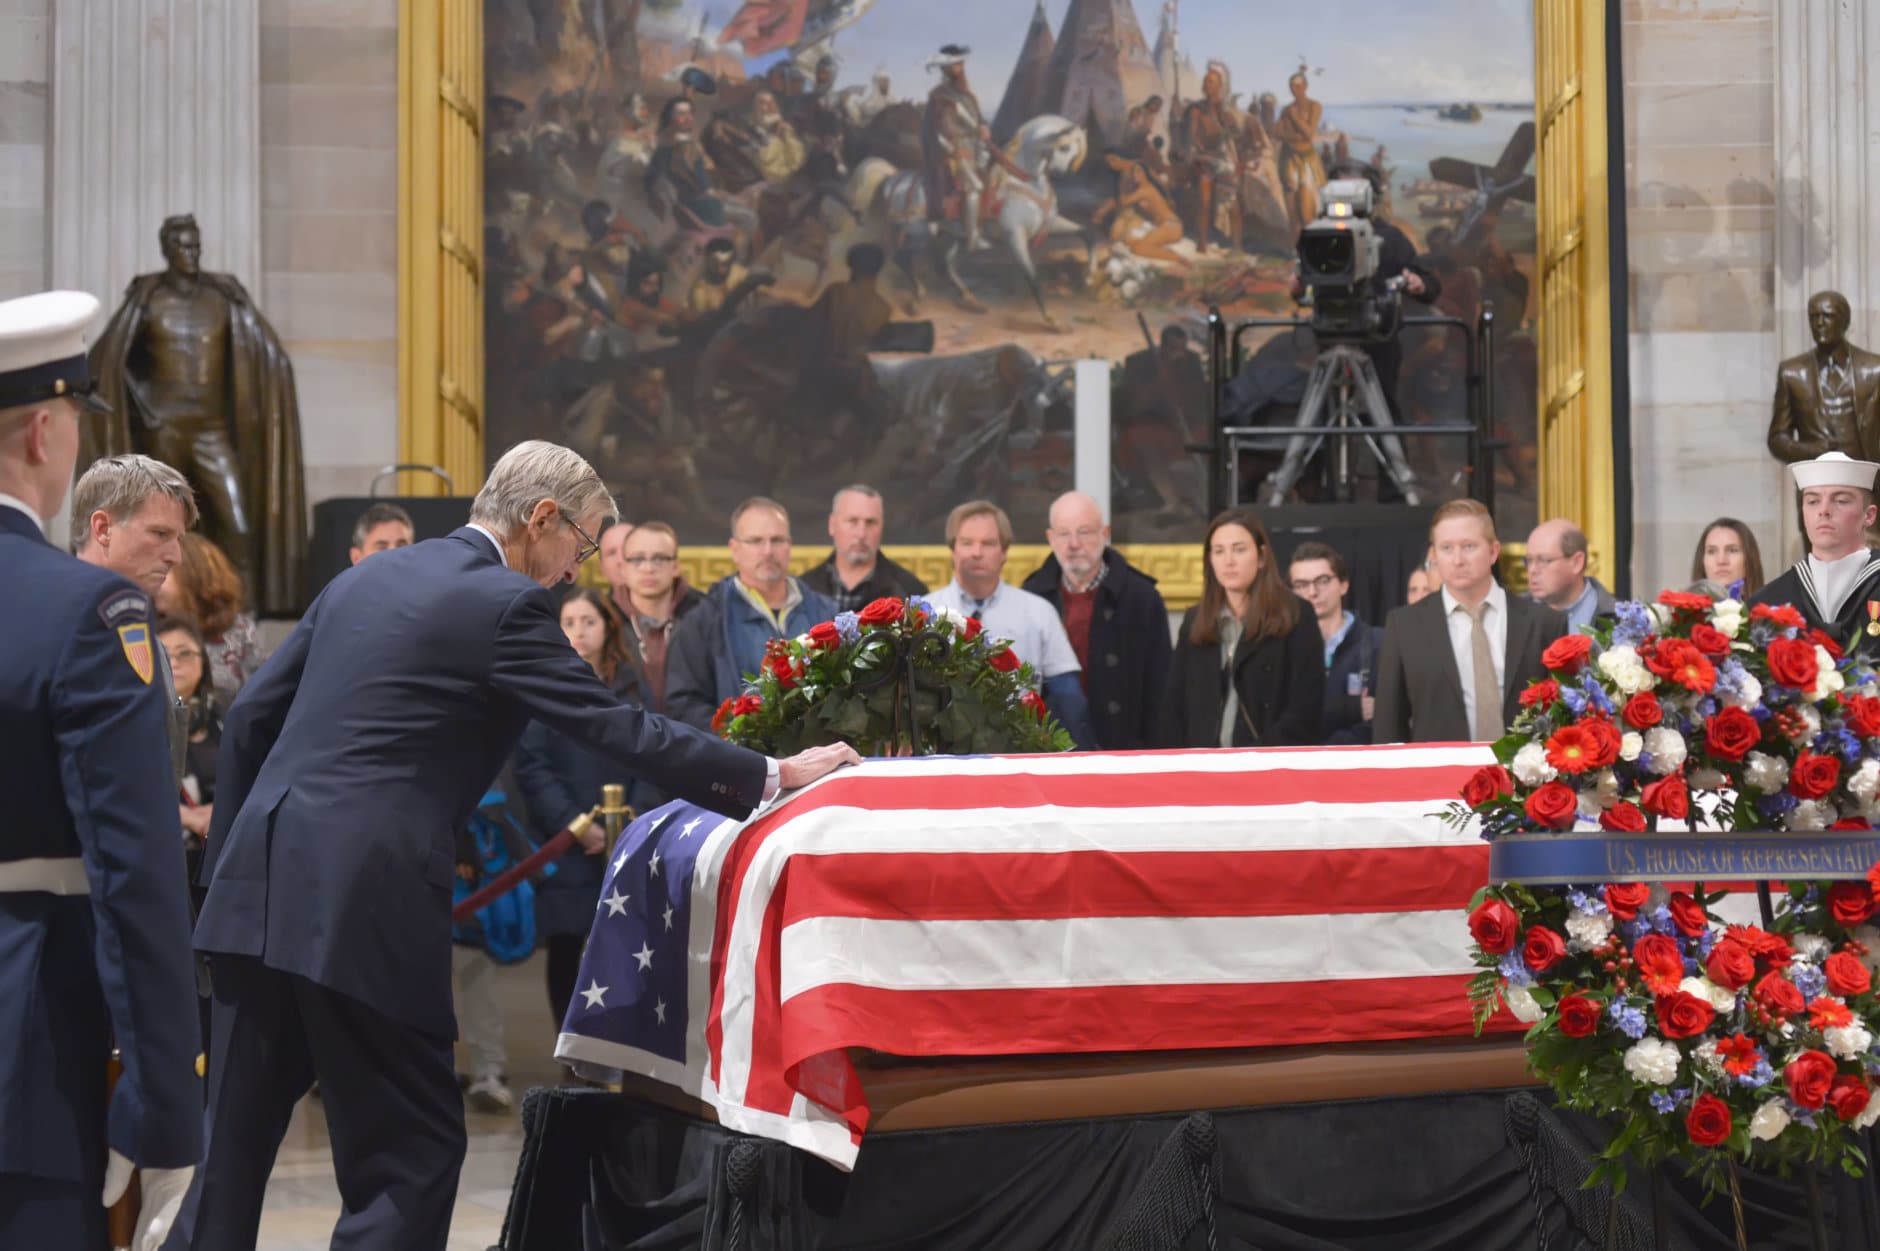 Jonathan Bush, brother of the late President George H.W. Bush, places his hand on his brother's coffin during the lying-in-state on December 4, 2018. (Courtesy Shannon Finney/<a href="https://www.shannonfinneyphotography.com/index" target="_blank" rel="noopener noreferrer">shannonfinneyphotography.com</a>)